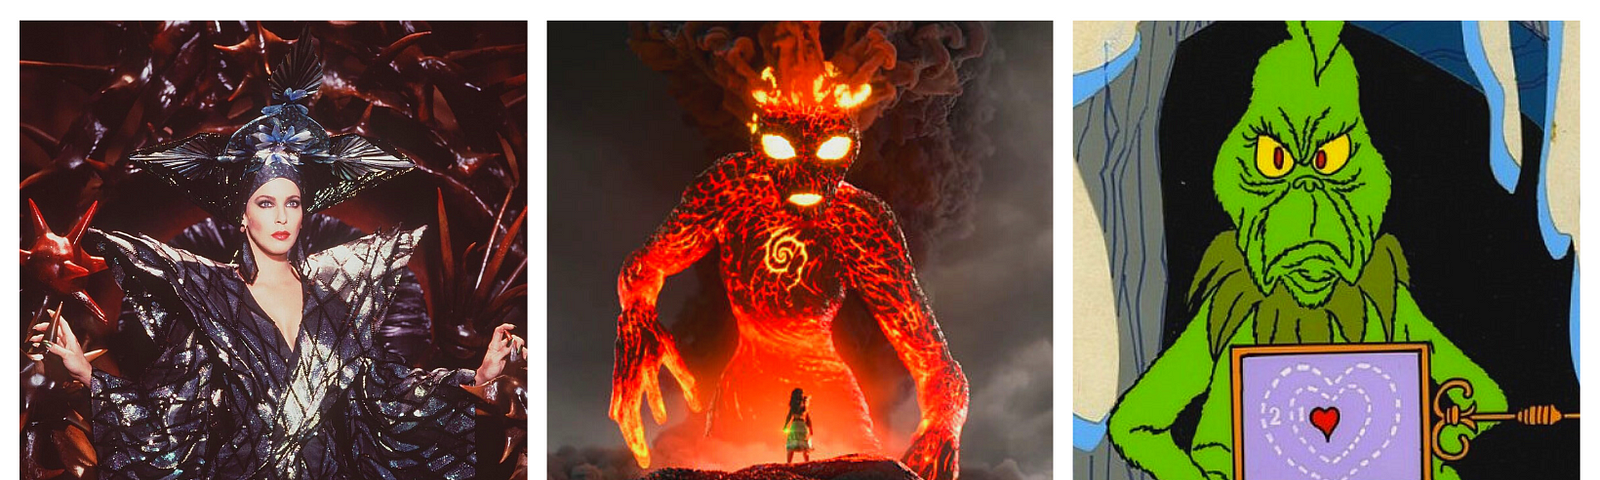 Three pictures. On the left, deadly and beautiful Queen Xayide, the villain from “The Neverending Story Part 2.” Center, lava demon Te Kā looming over Moana, from Disney’s “Moana.” Right, the cartoon Grinch with an “x-ray” showing his heart is two sizes too small, from Dr. Seuss’s “How the Grinch Stole Christmas.”